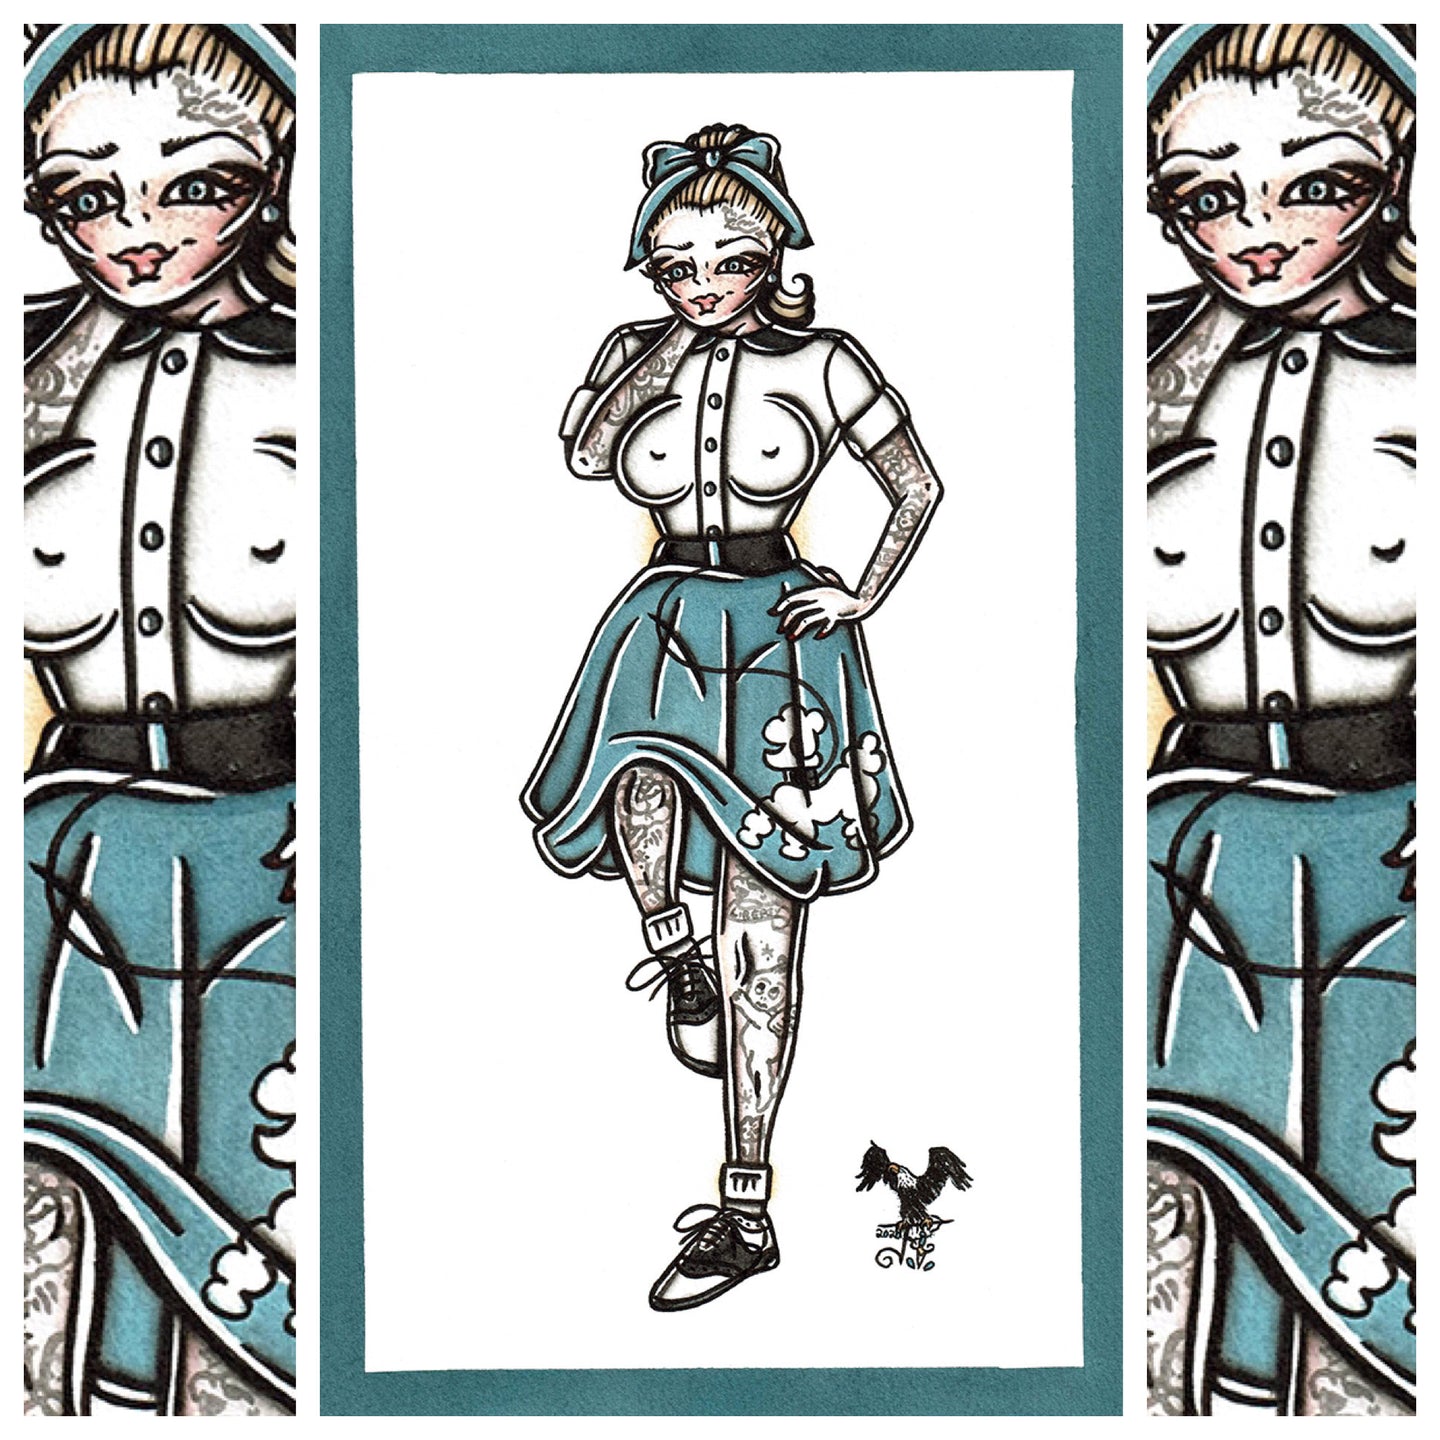 American traditional tattoo flash sexy 1950s poodle skirt pinup spitshade painting.